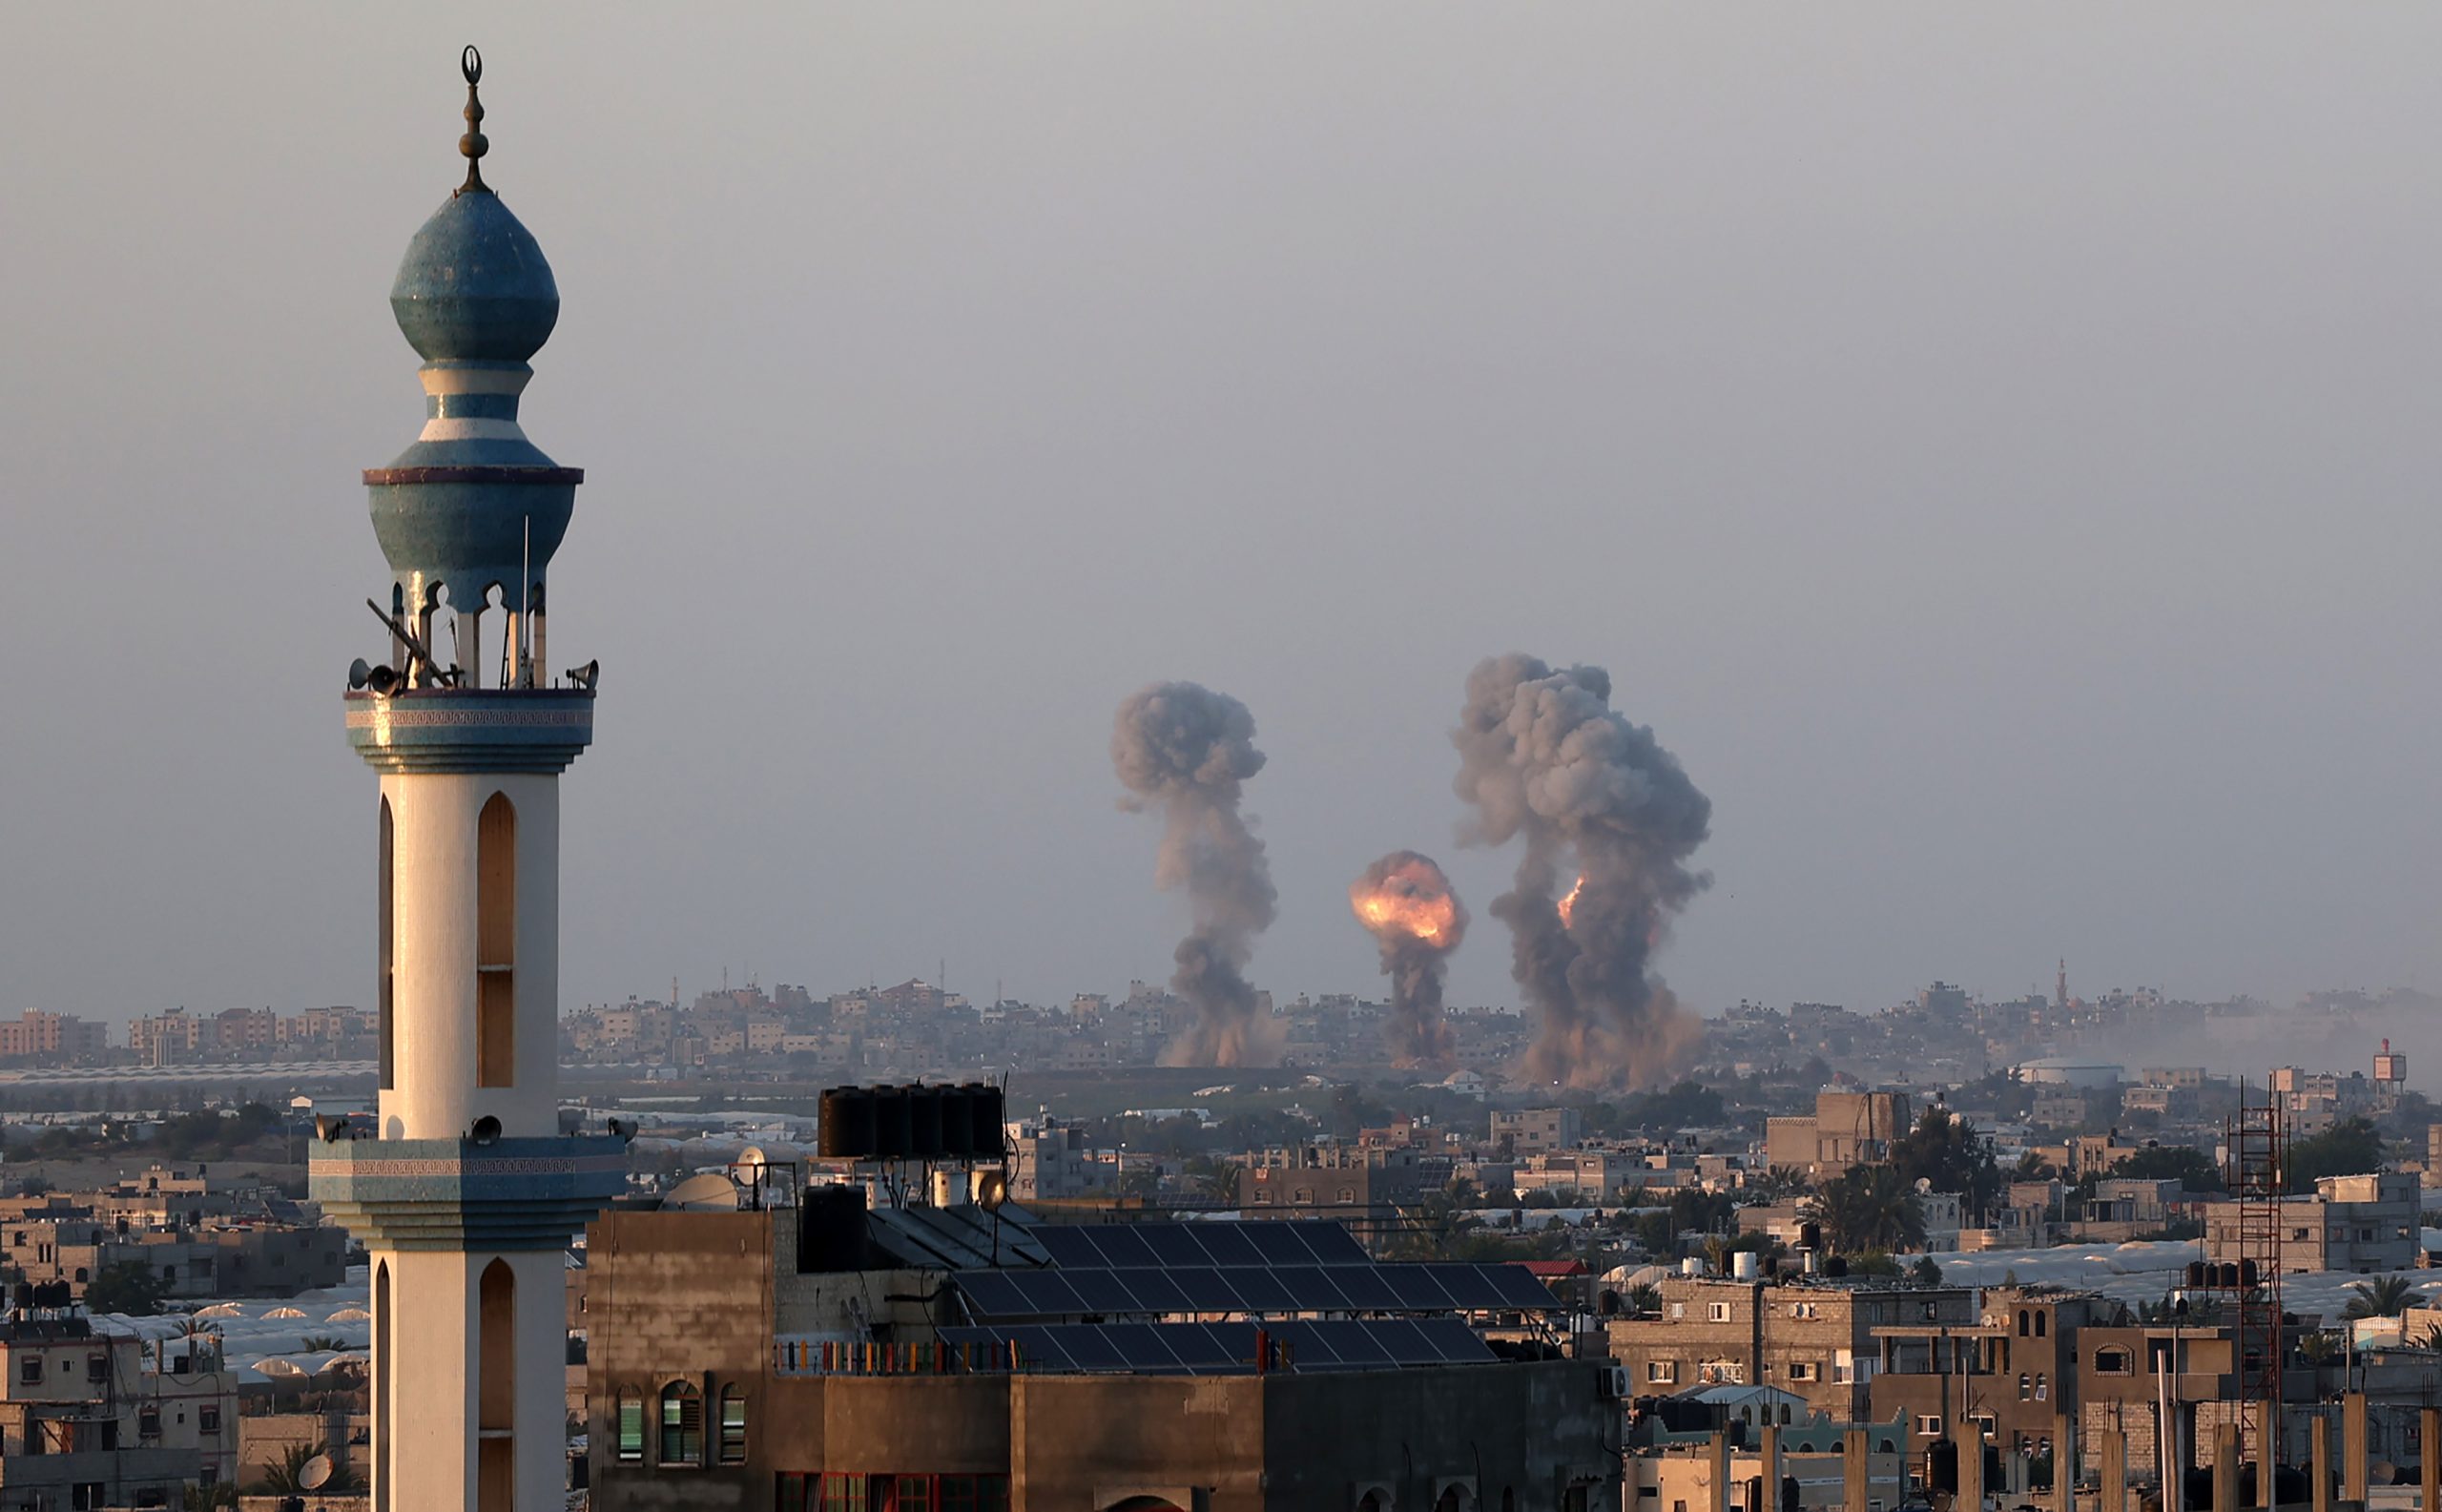 Israeli,Air,Strikes,On,The,City,Of,Rafah,In,The